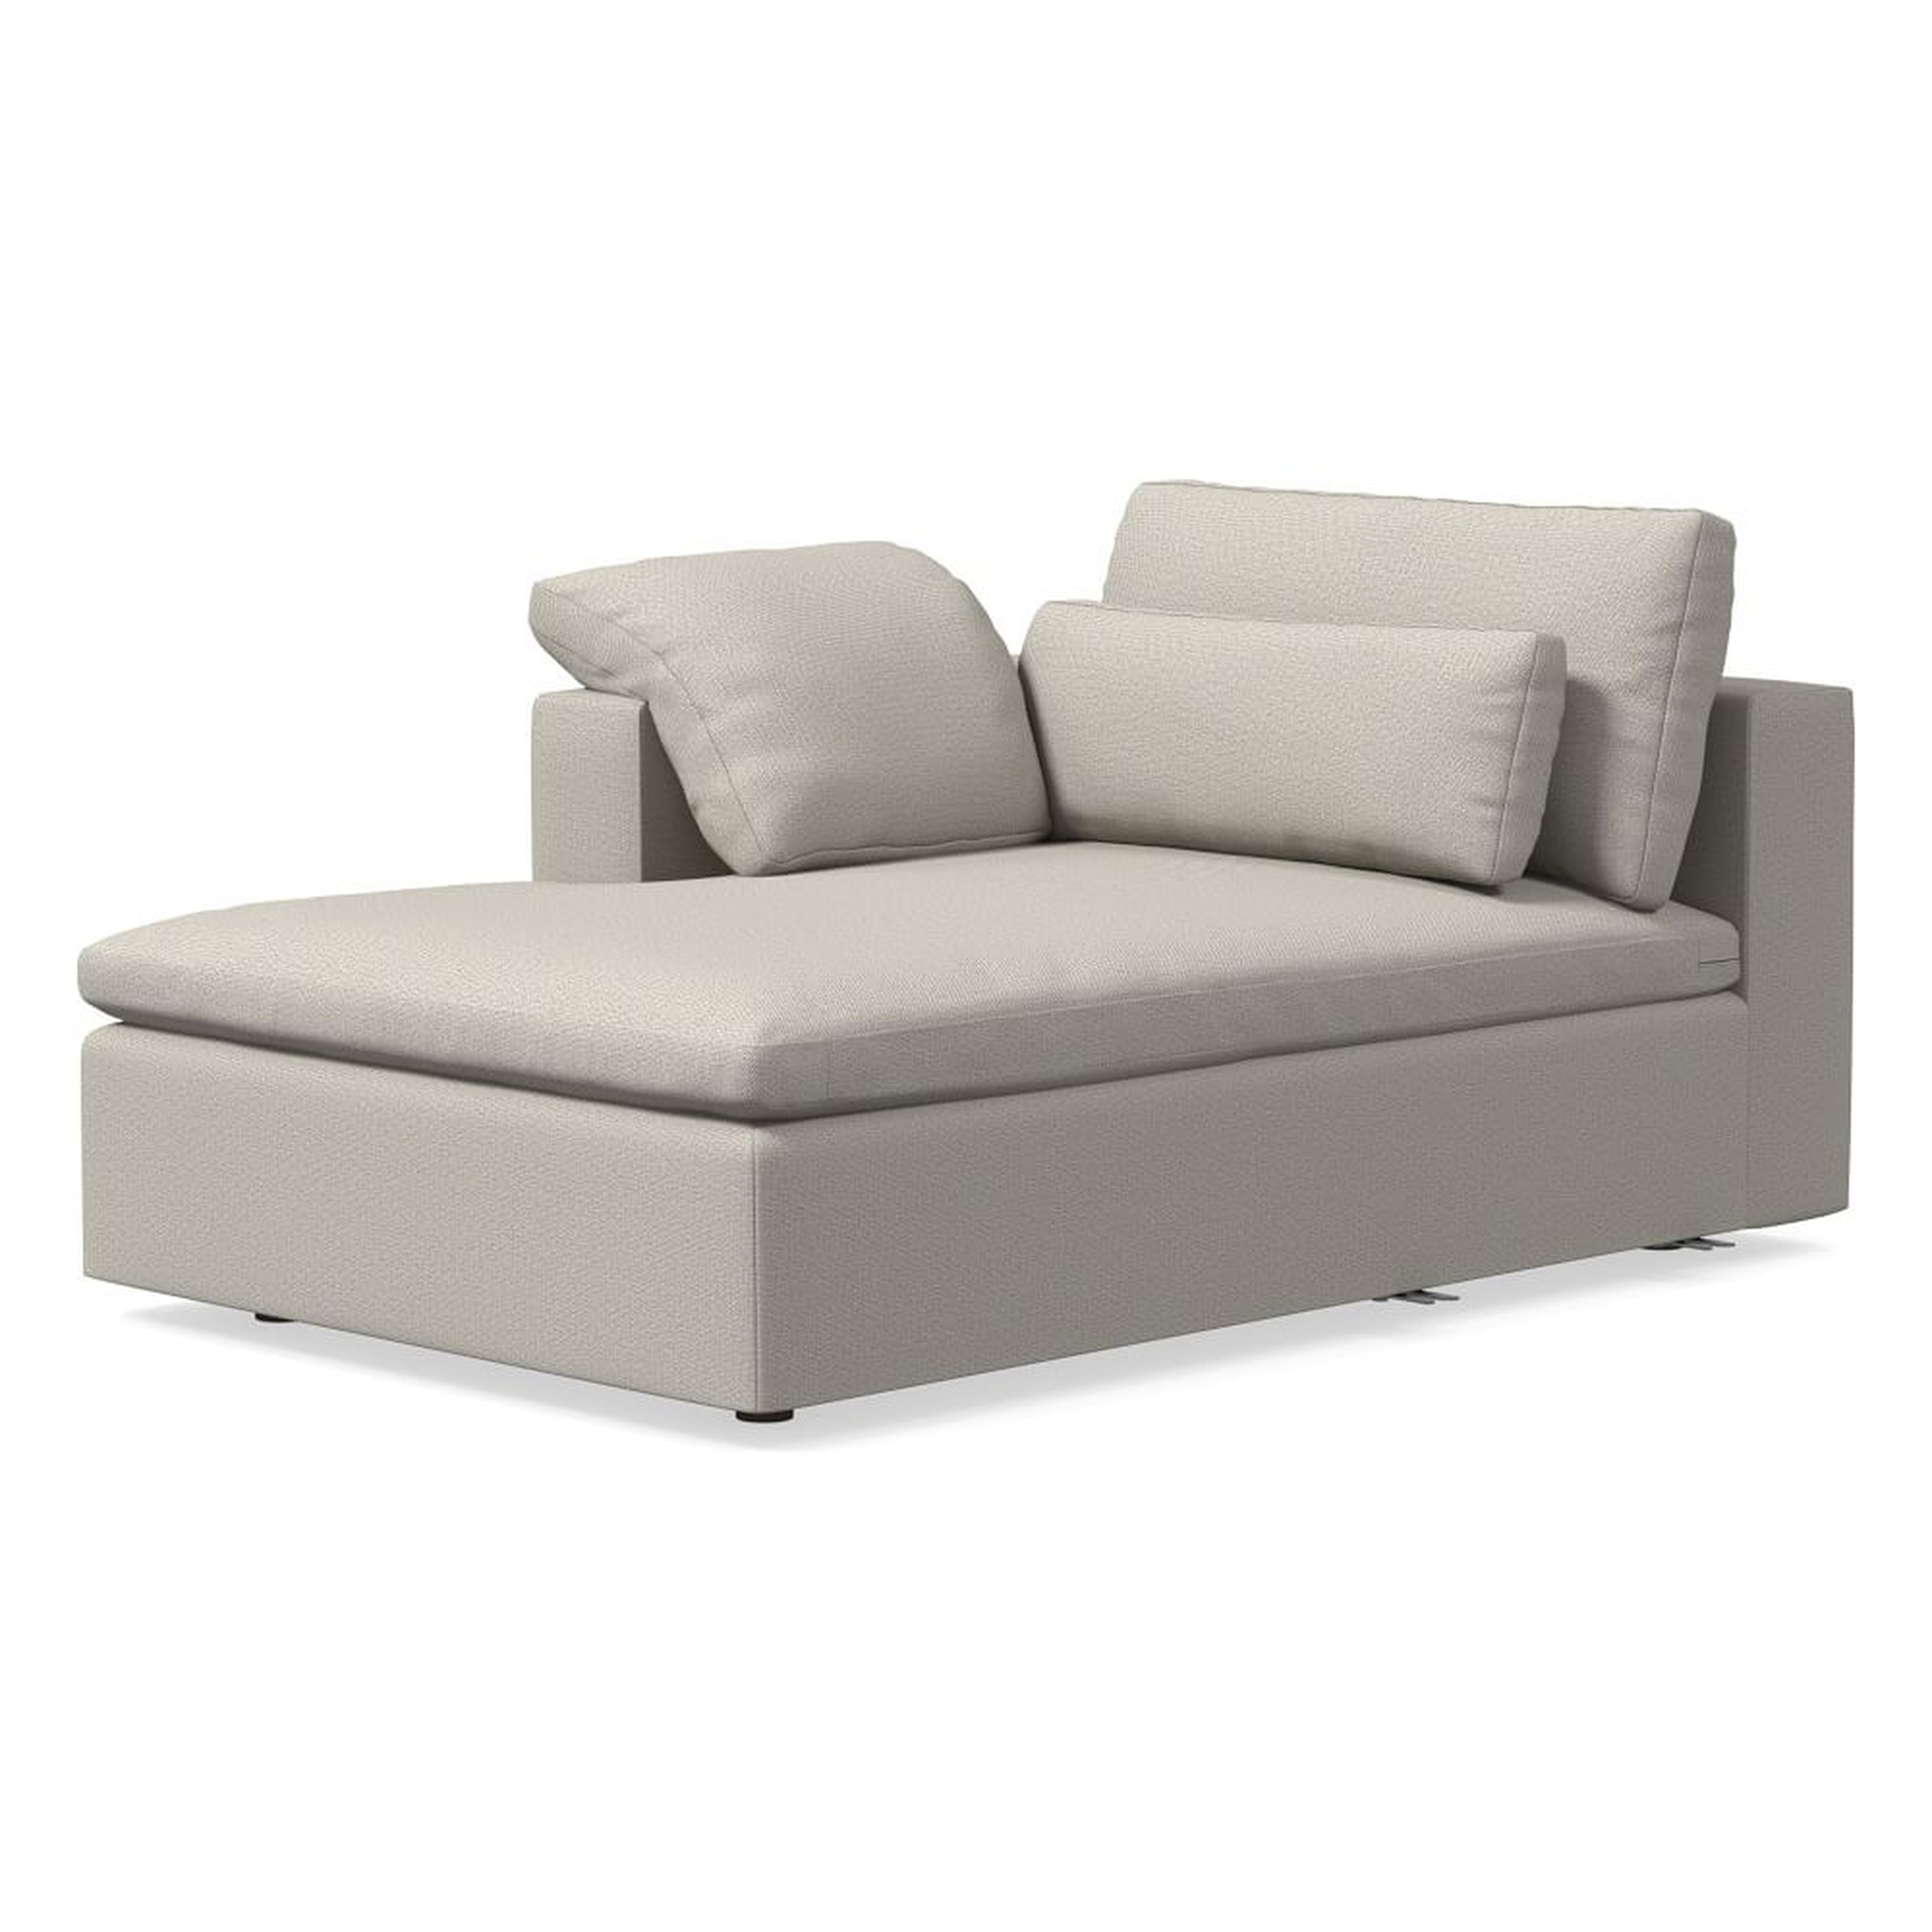 Harmony Modular Left Arm Storage Chaise, Down, Performance Basket Slub, Pearl Gray, Concealed Supports - West Elm